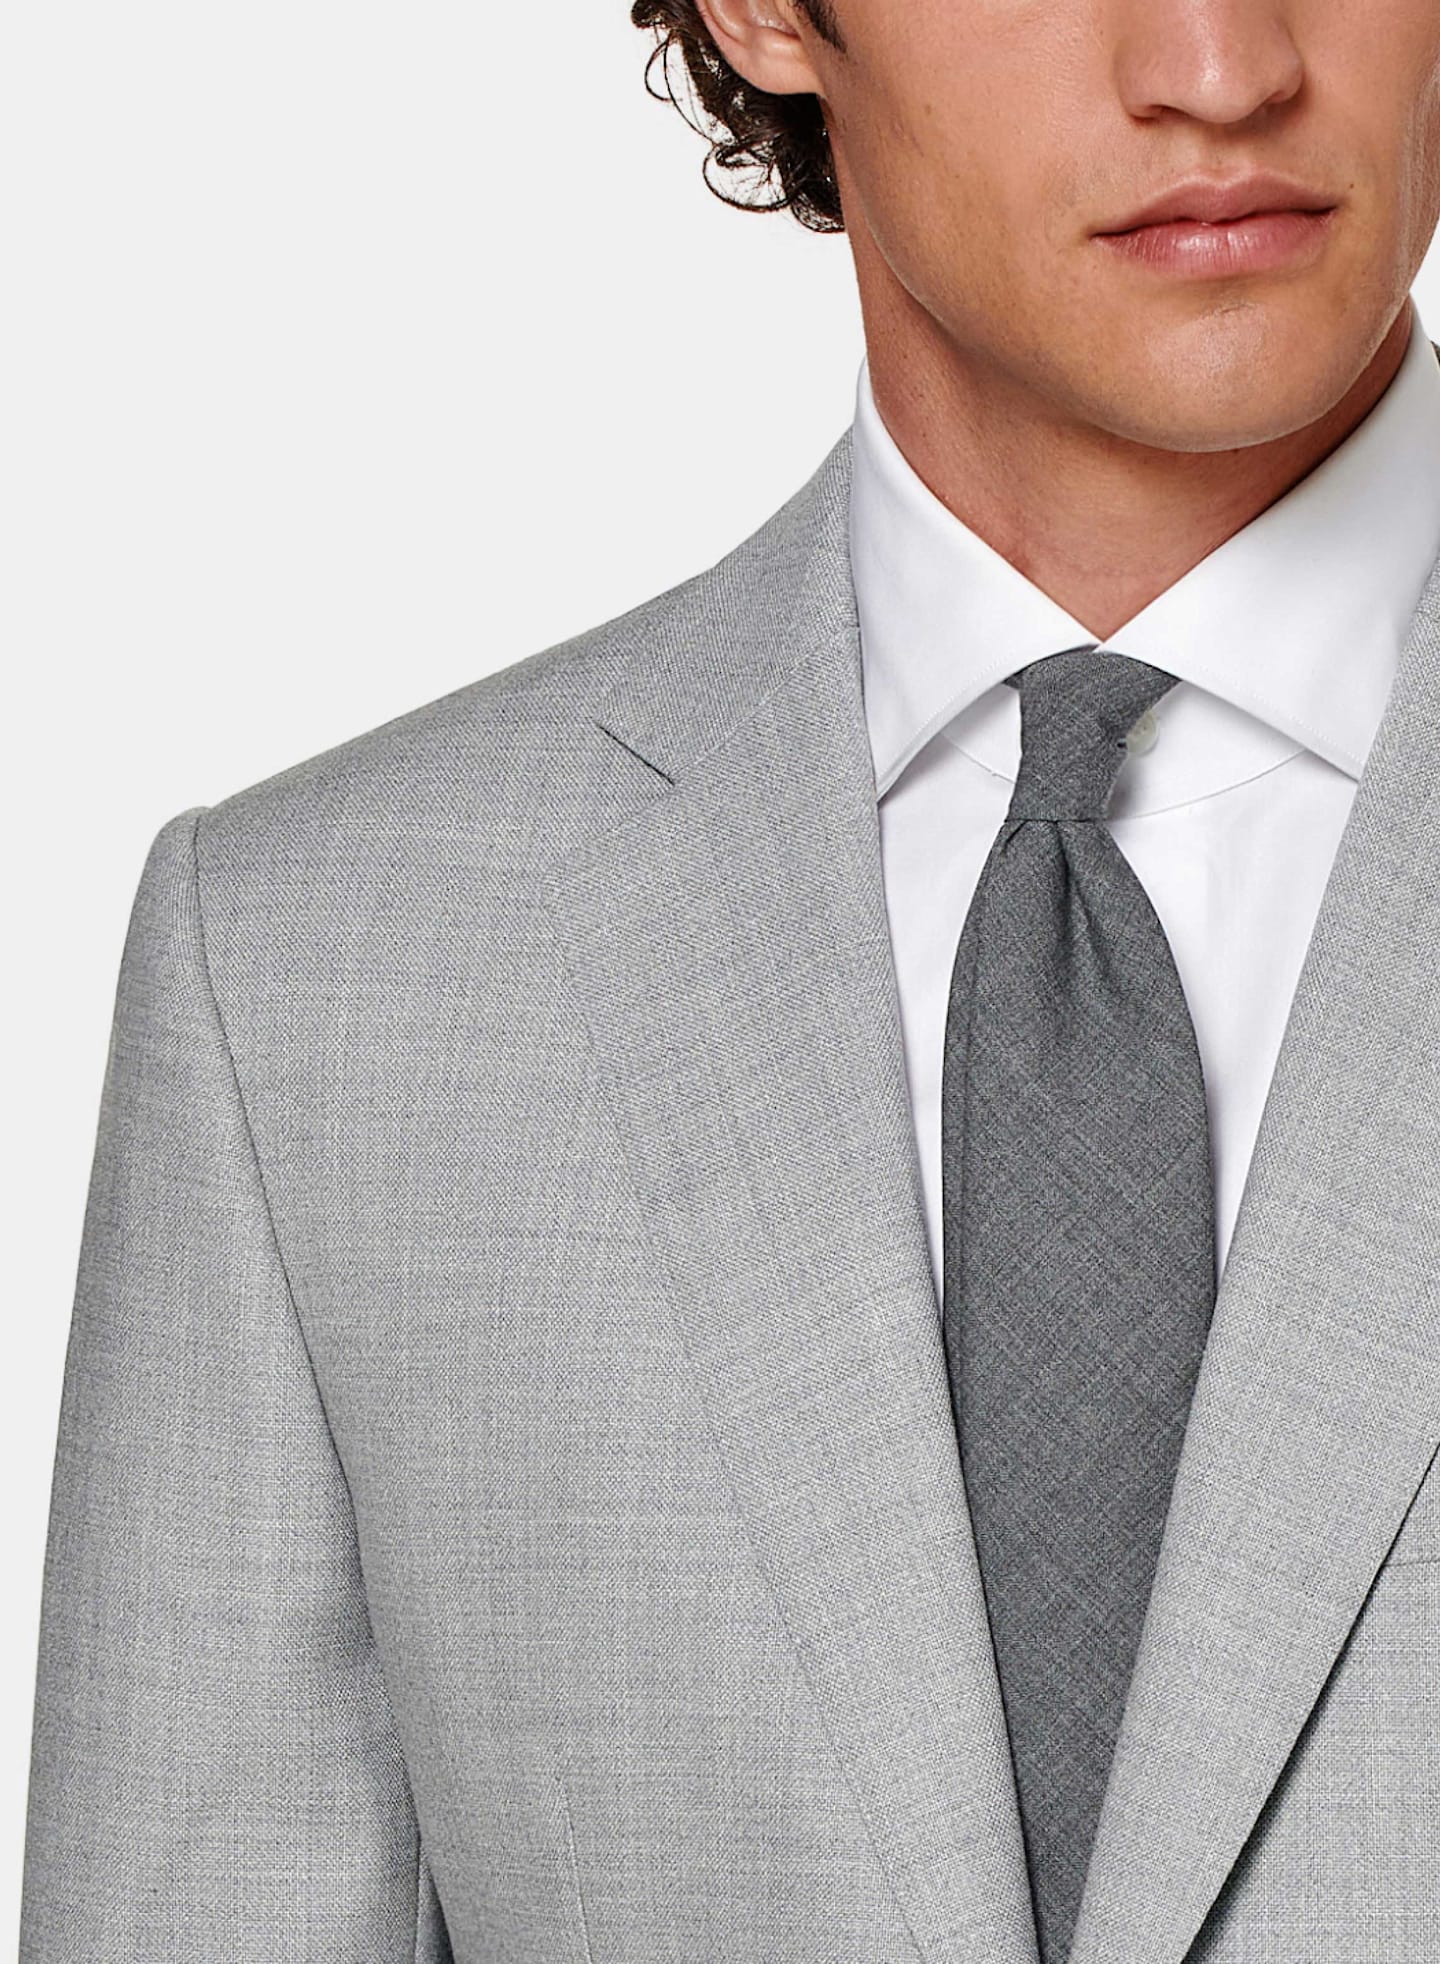 Grey suit with notch lapel, worn with white shirt and grey tie.